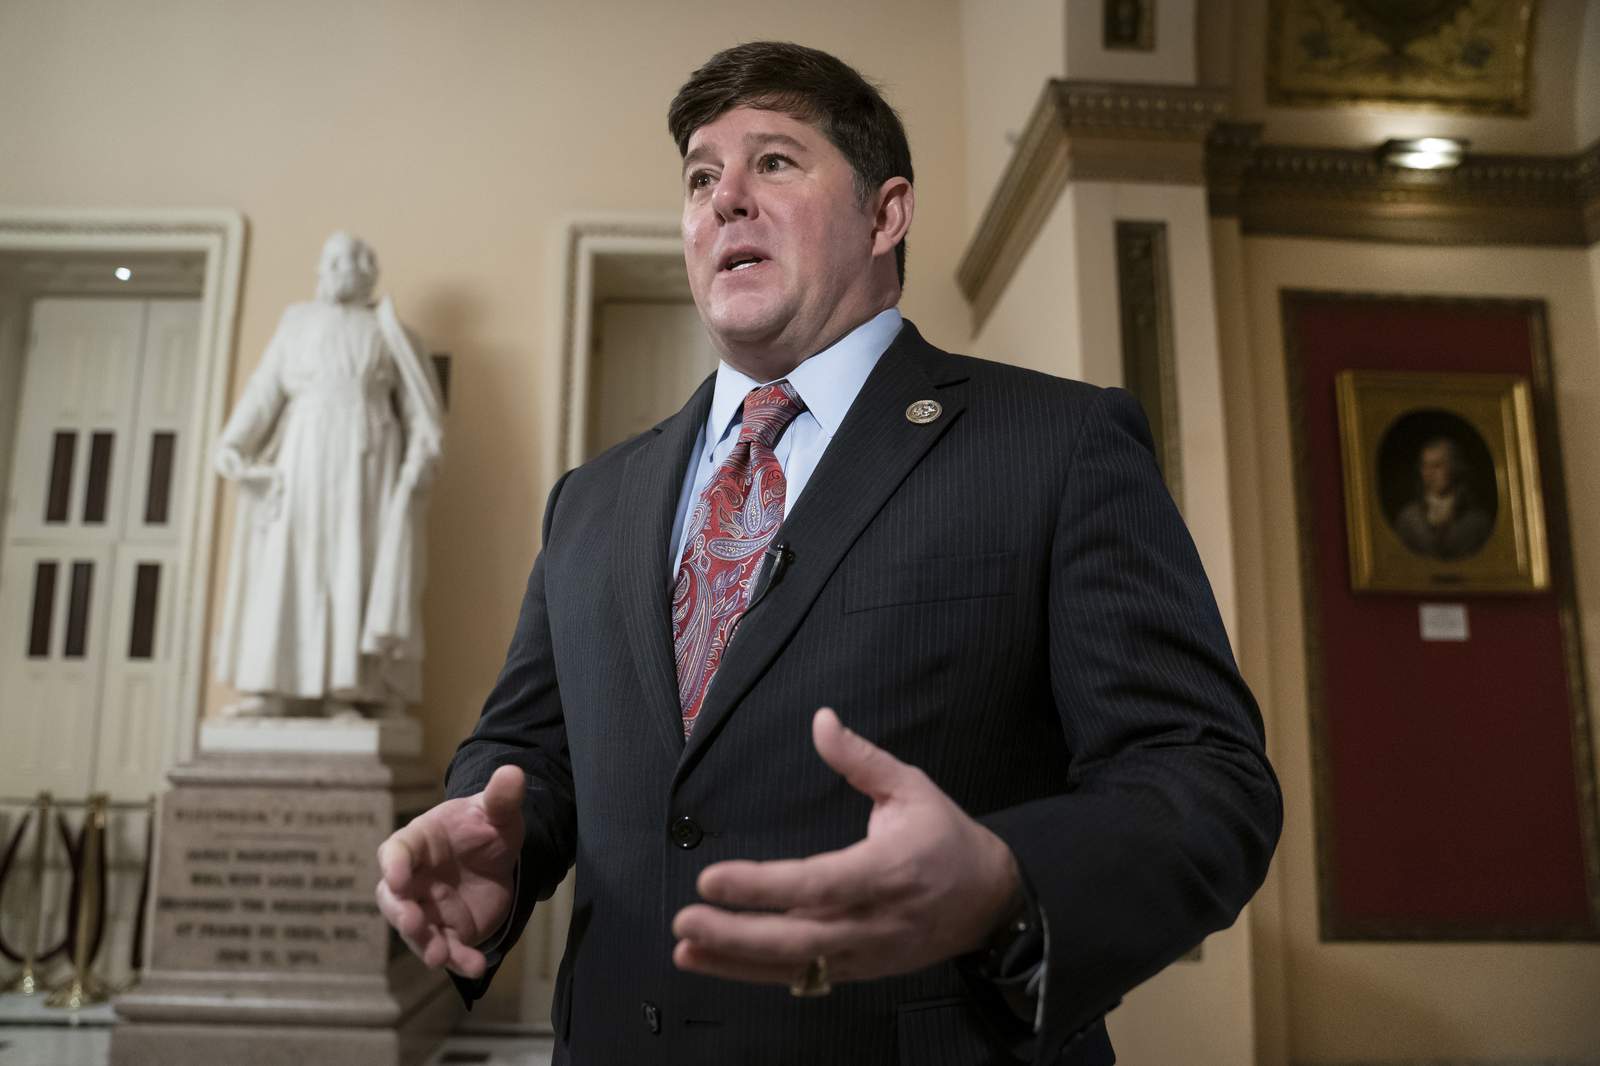 Mississippi congressman Palazzo accused of misusing funds